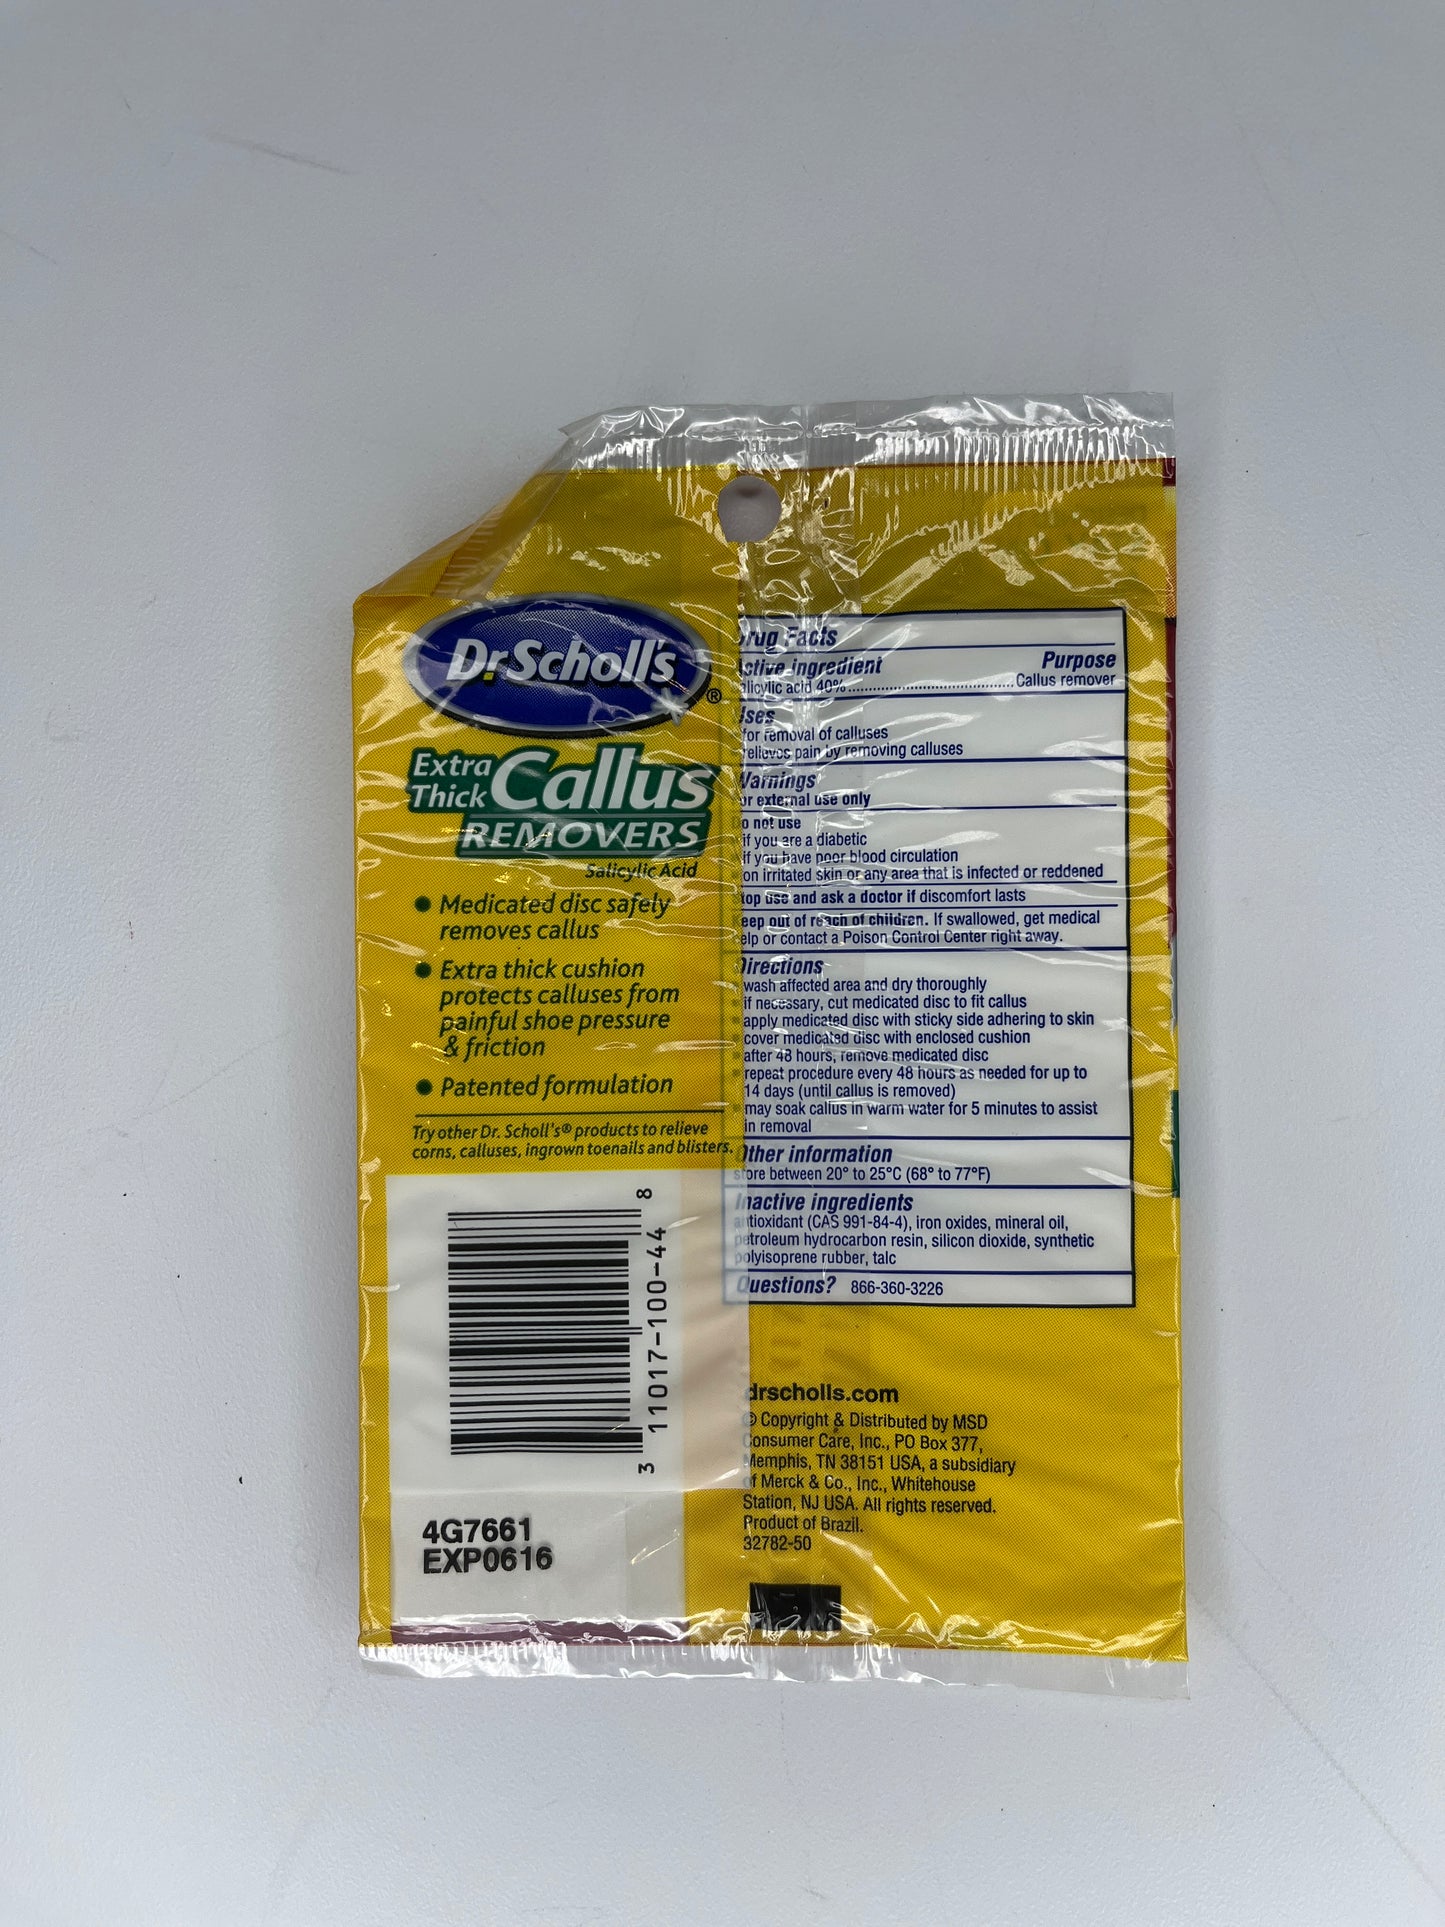 Dr. Scholl's Extra Thick Callus Removers SKU 000435